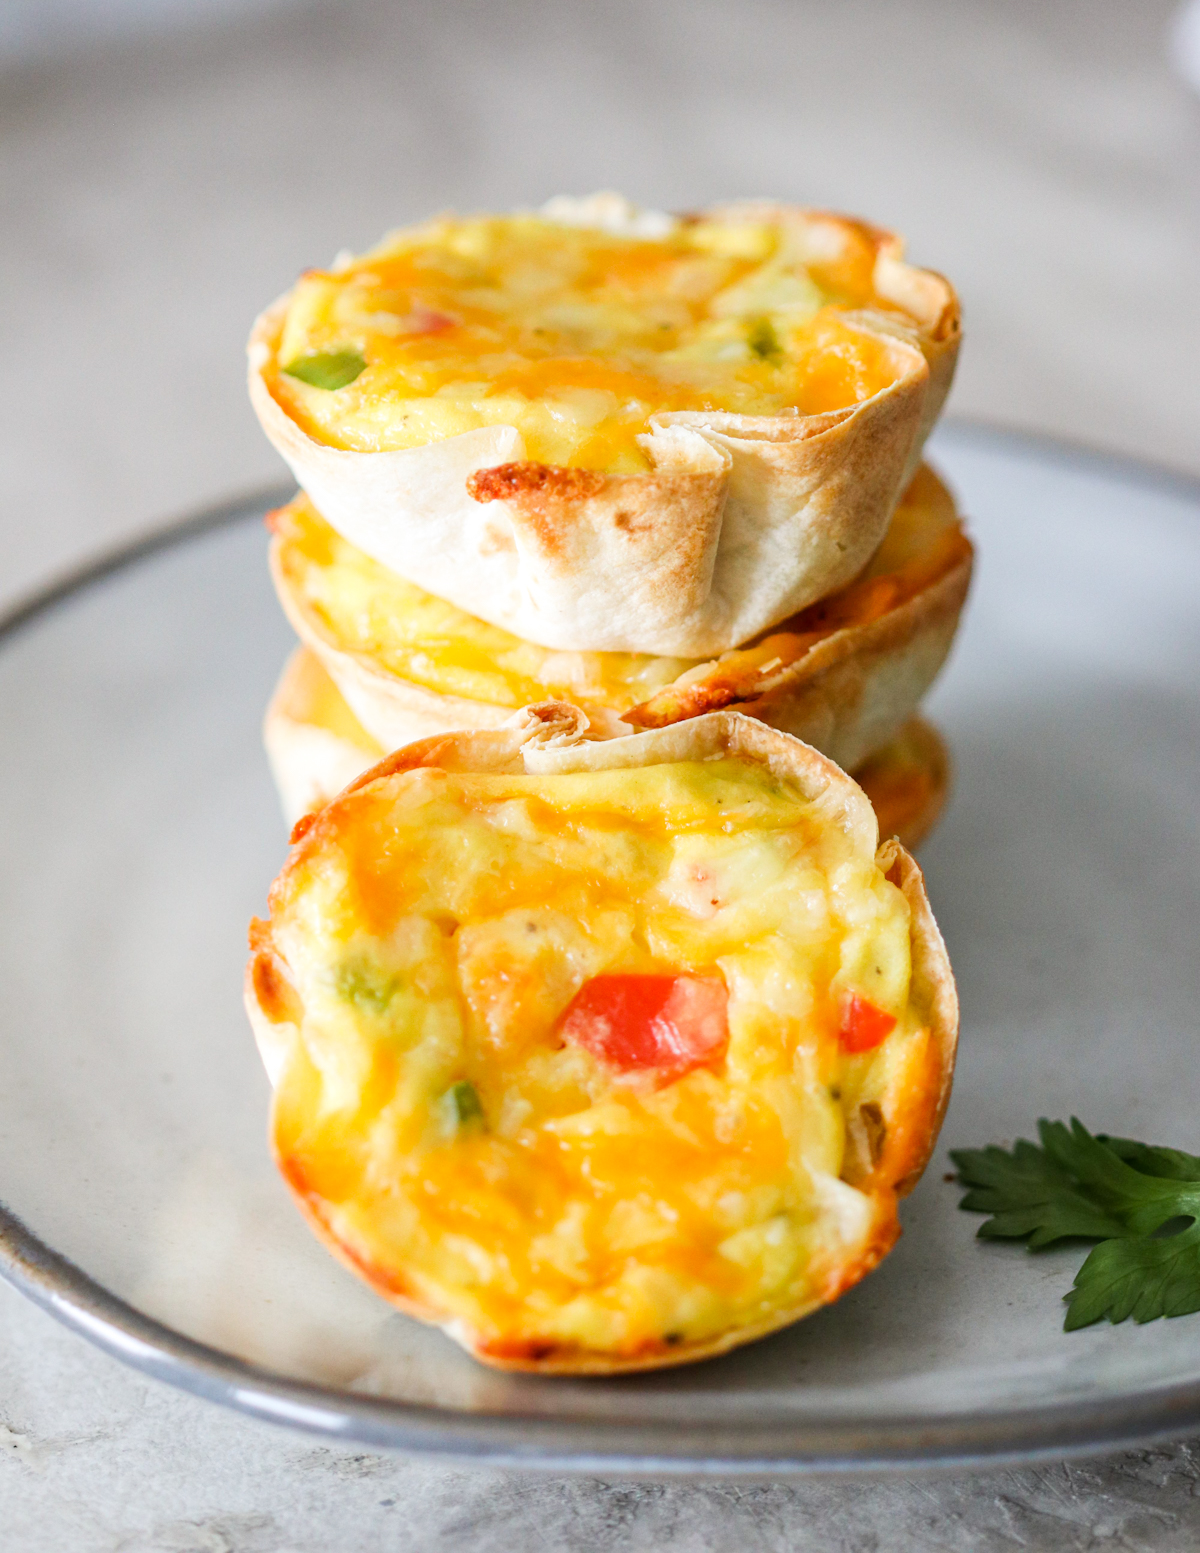 Why Tortilla with Egg and Cheese is great for breakfast #tortilla #egg #cheese #tortillawithegg #cheeserecipe #tortillarecipe #eggandcheese